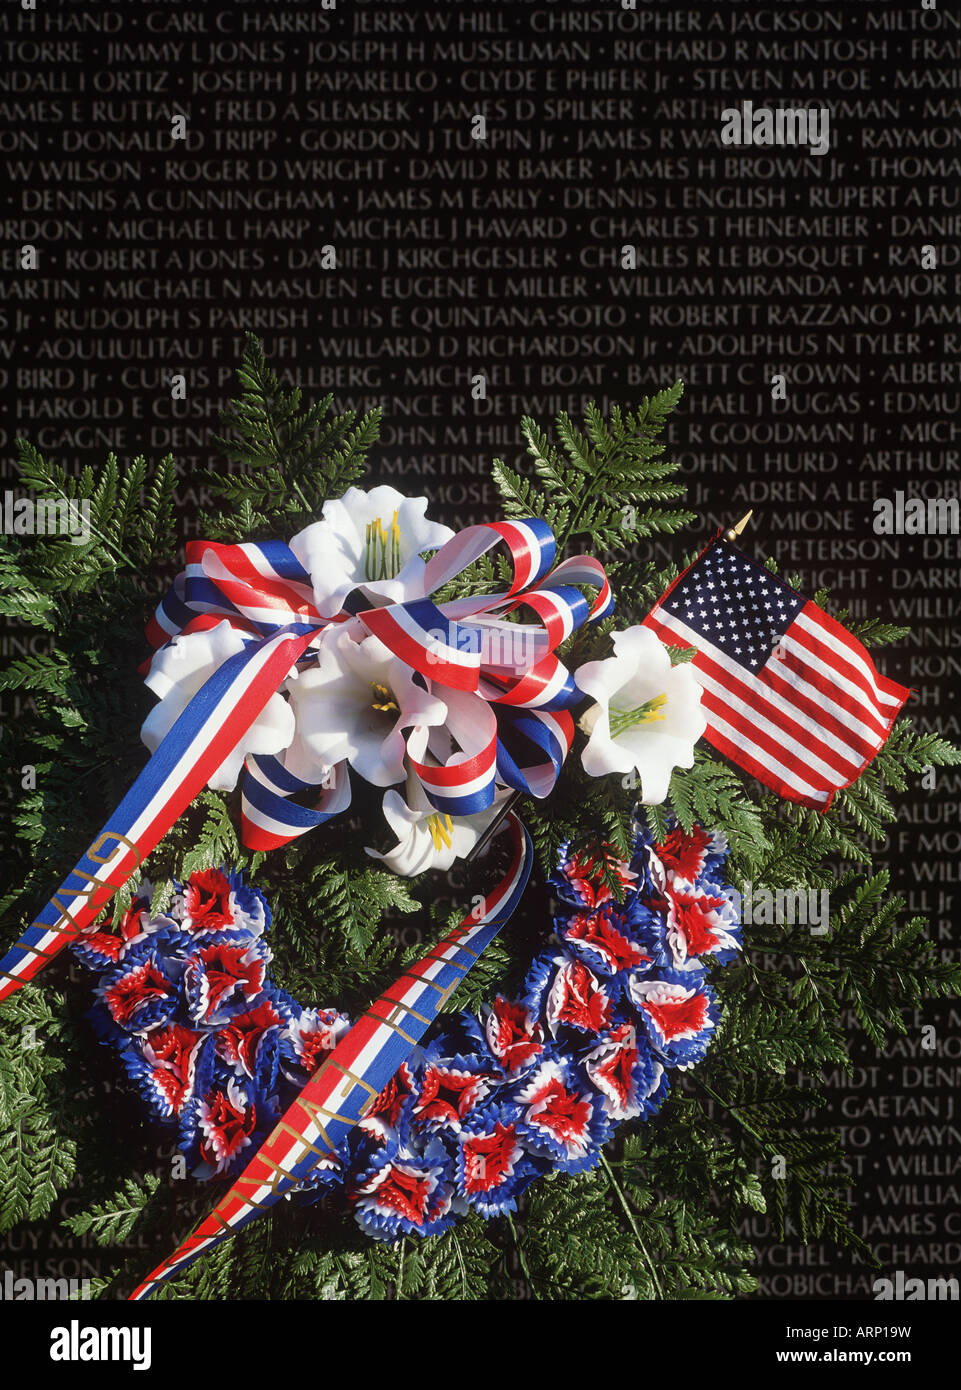 USA, Washington, DC, Vietnam Monument with floral wreath and flag Stock Photo